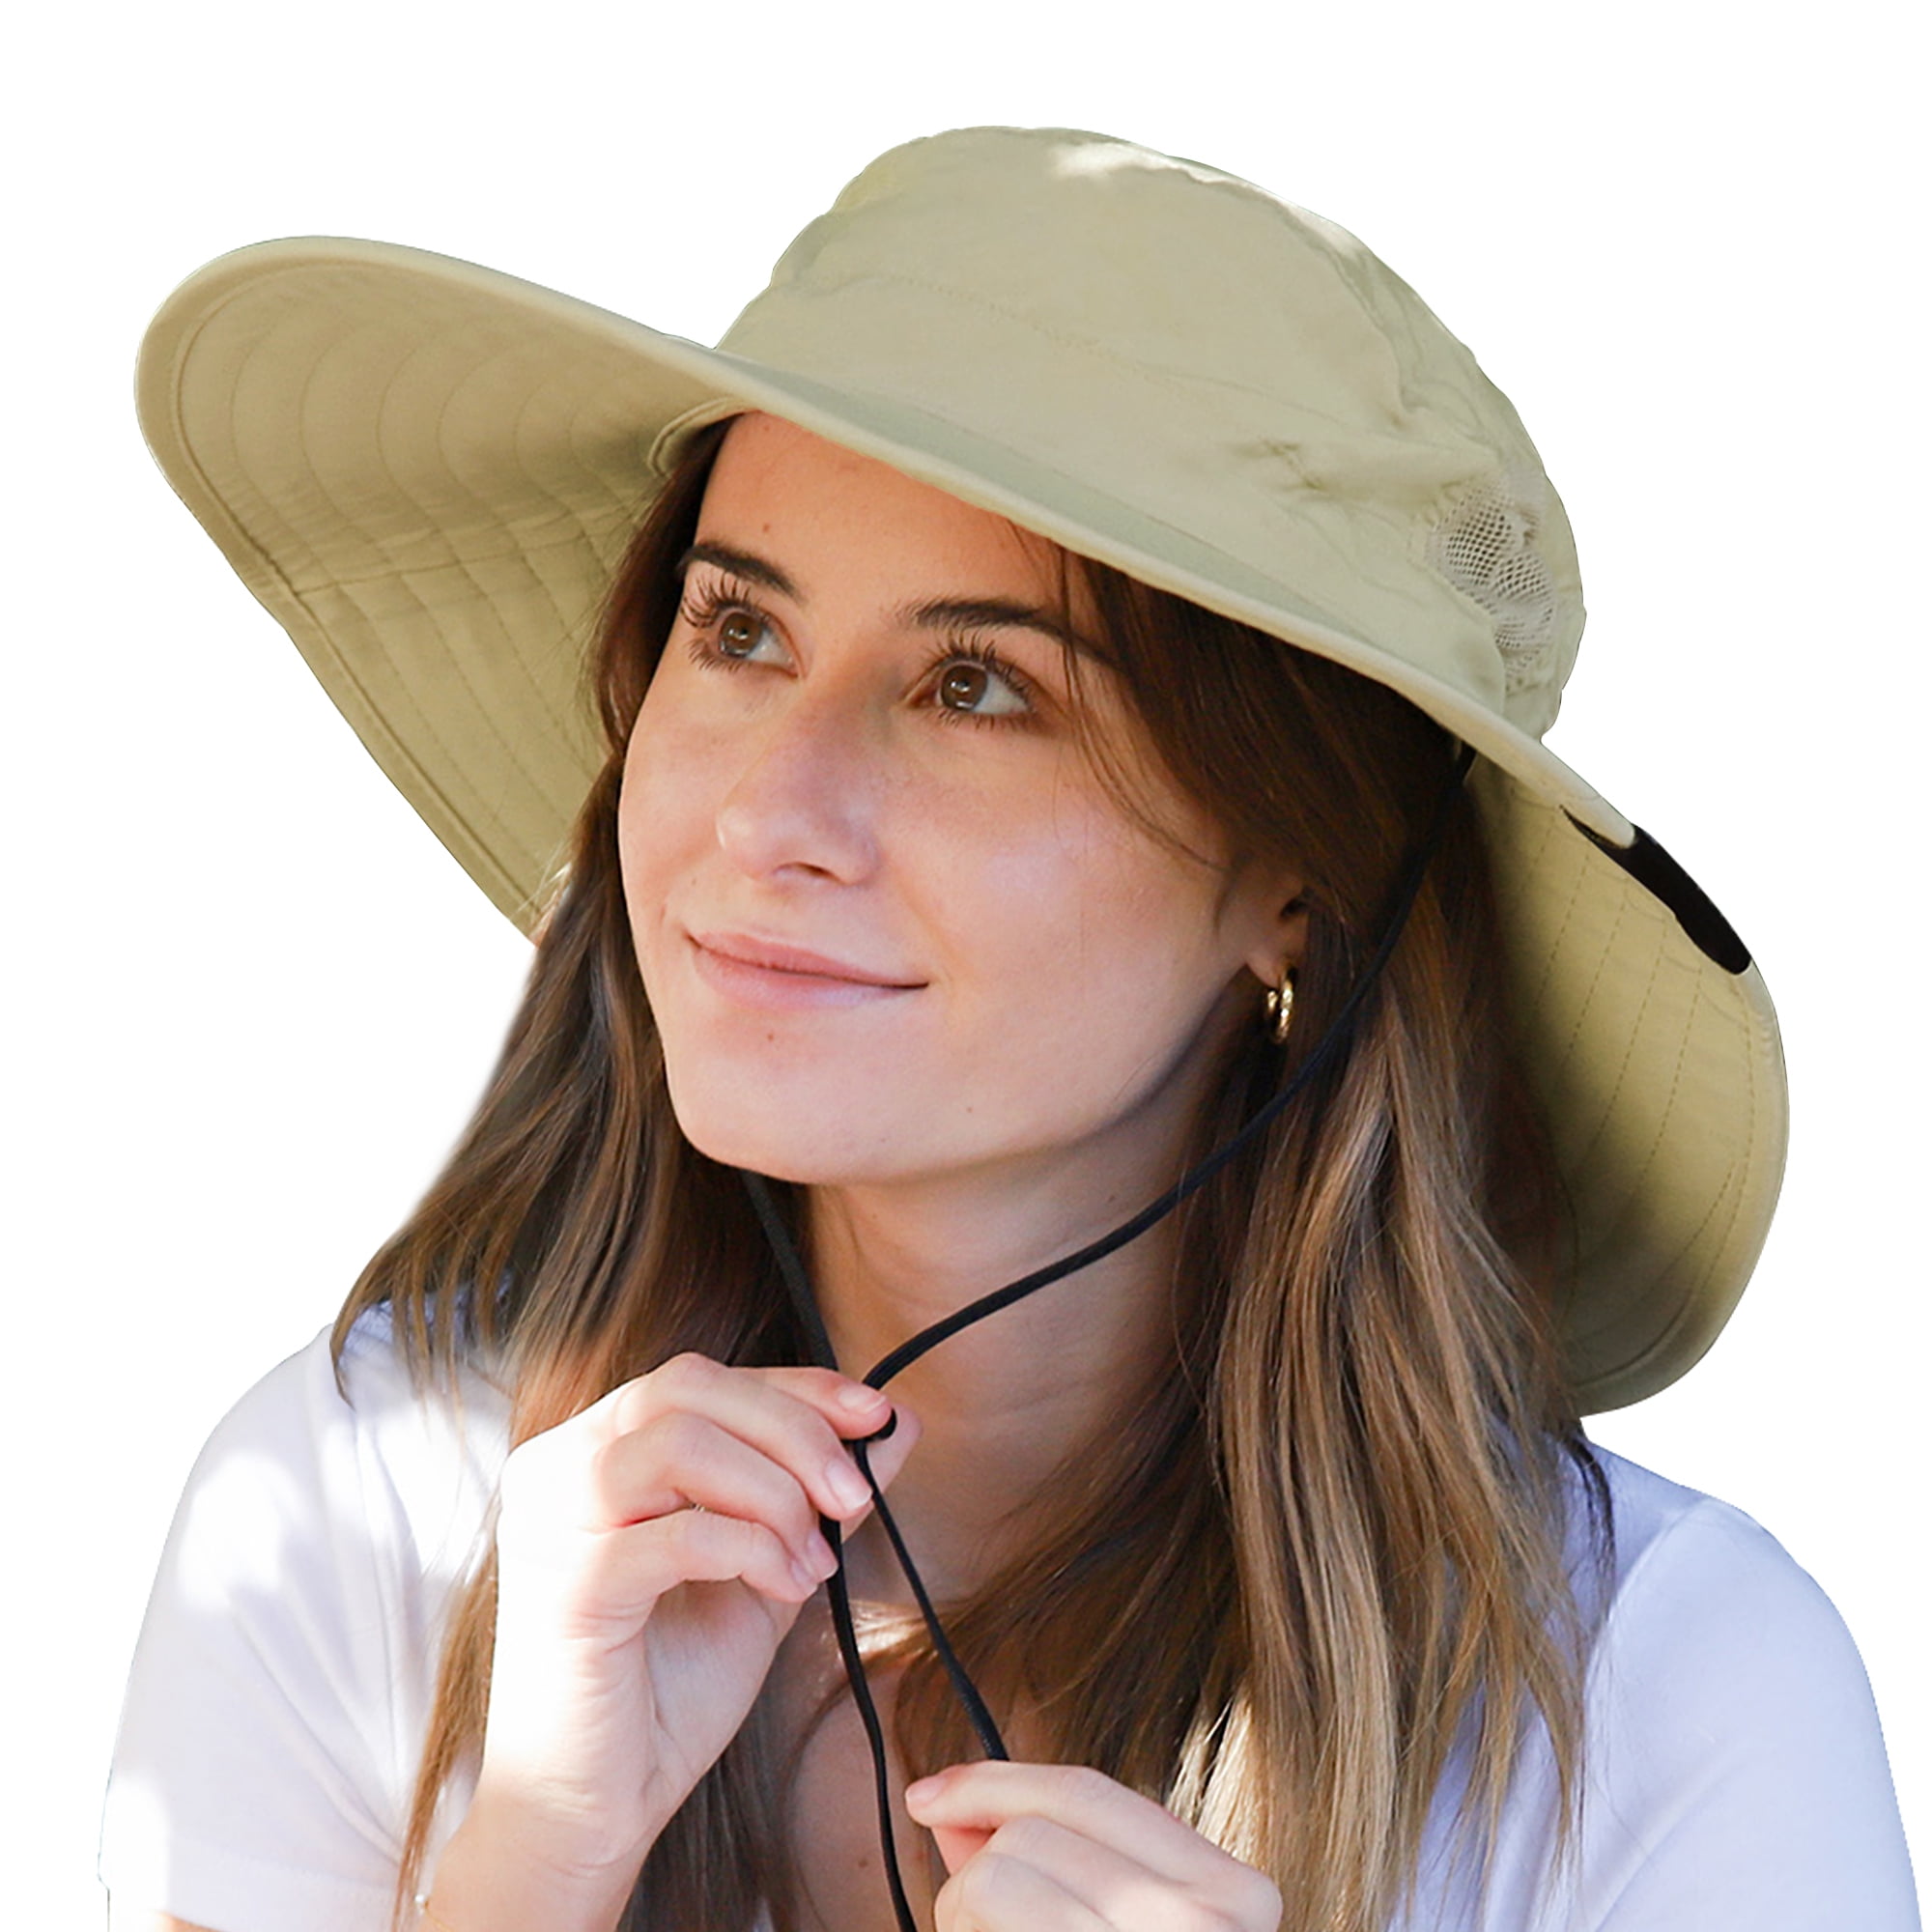 Women's Sun Hat with Wide Brim Neck Flap, Fishing Safari Hat for